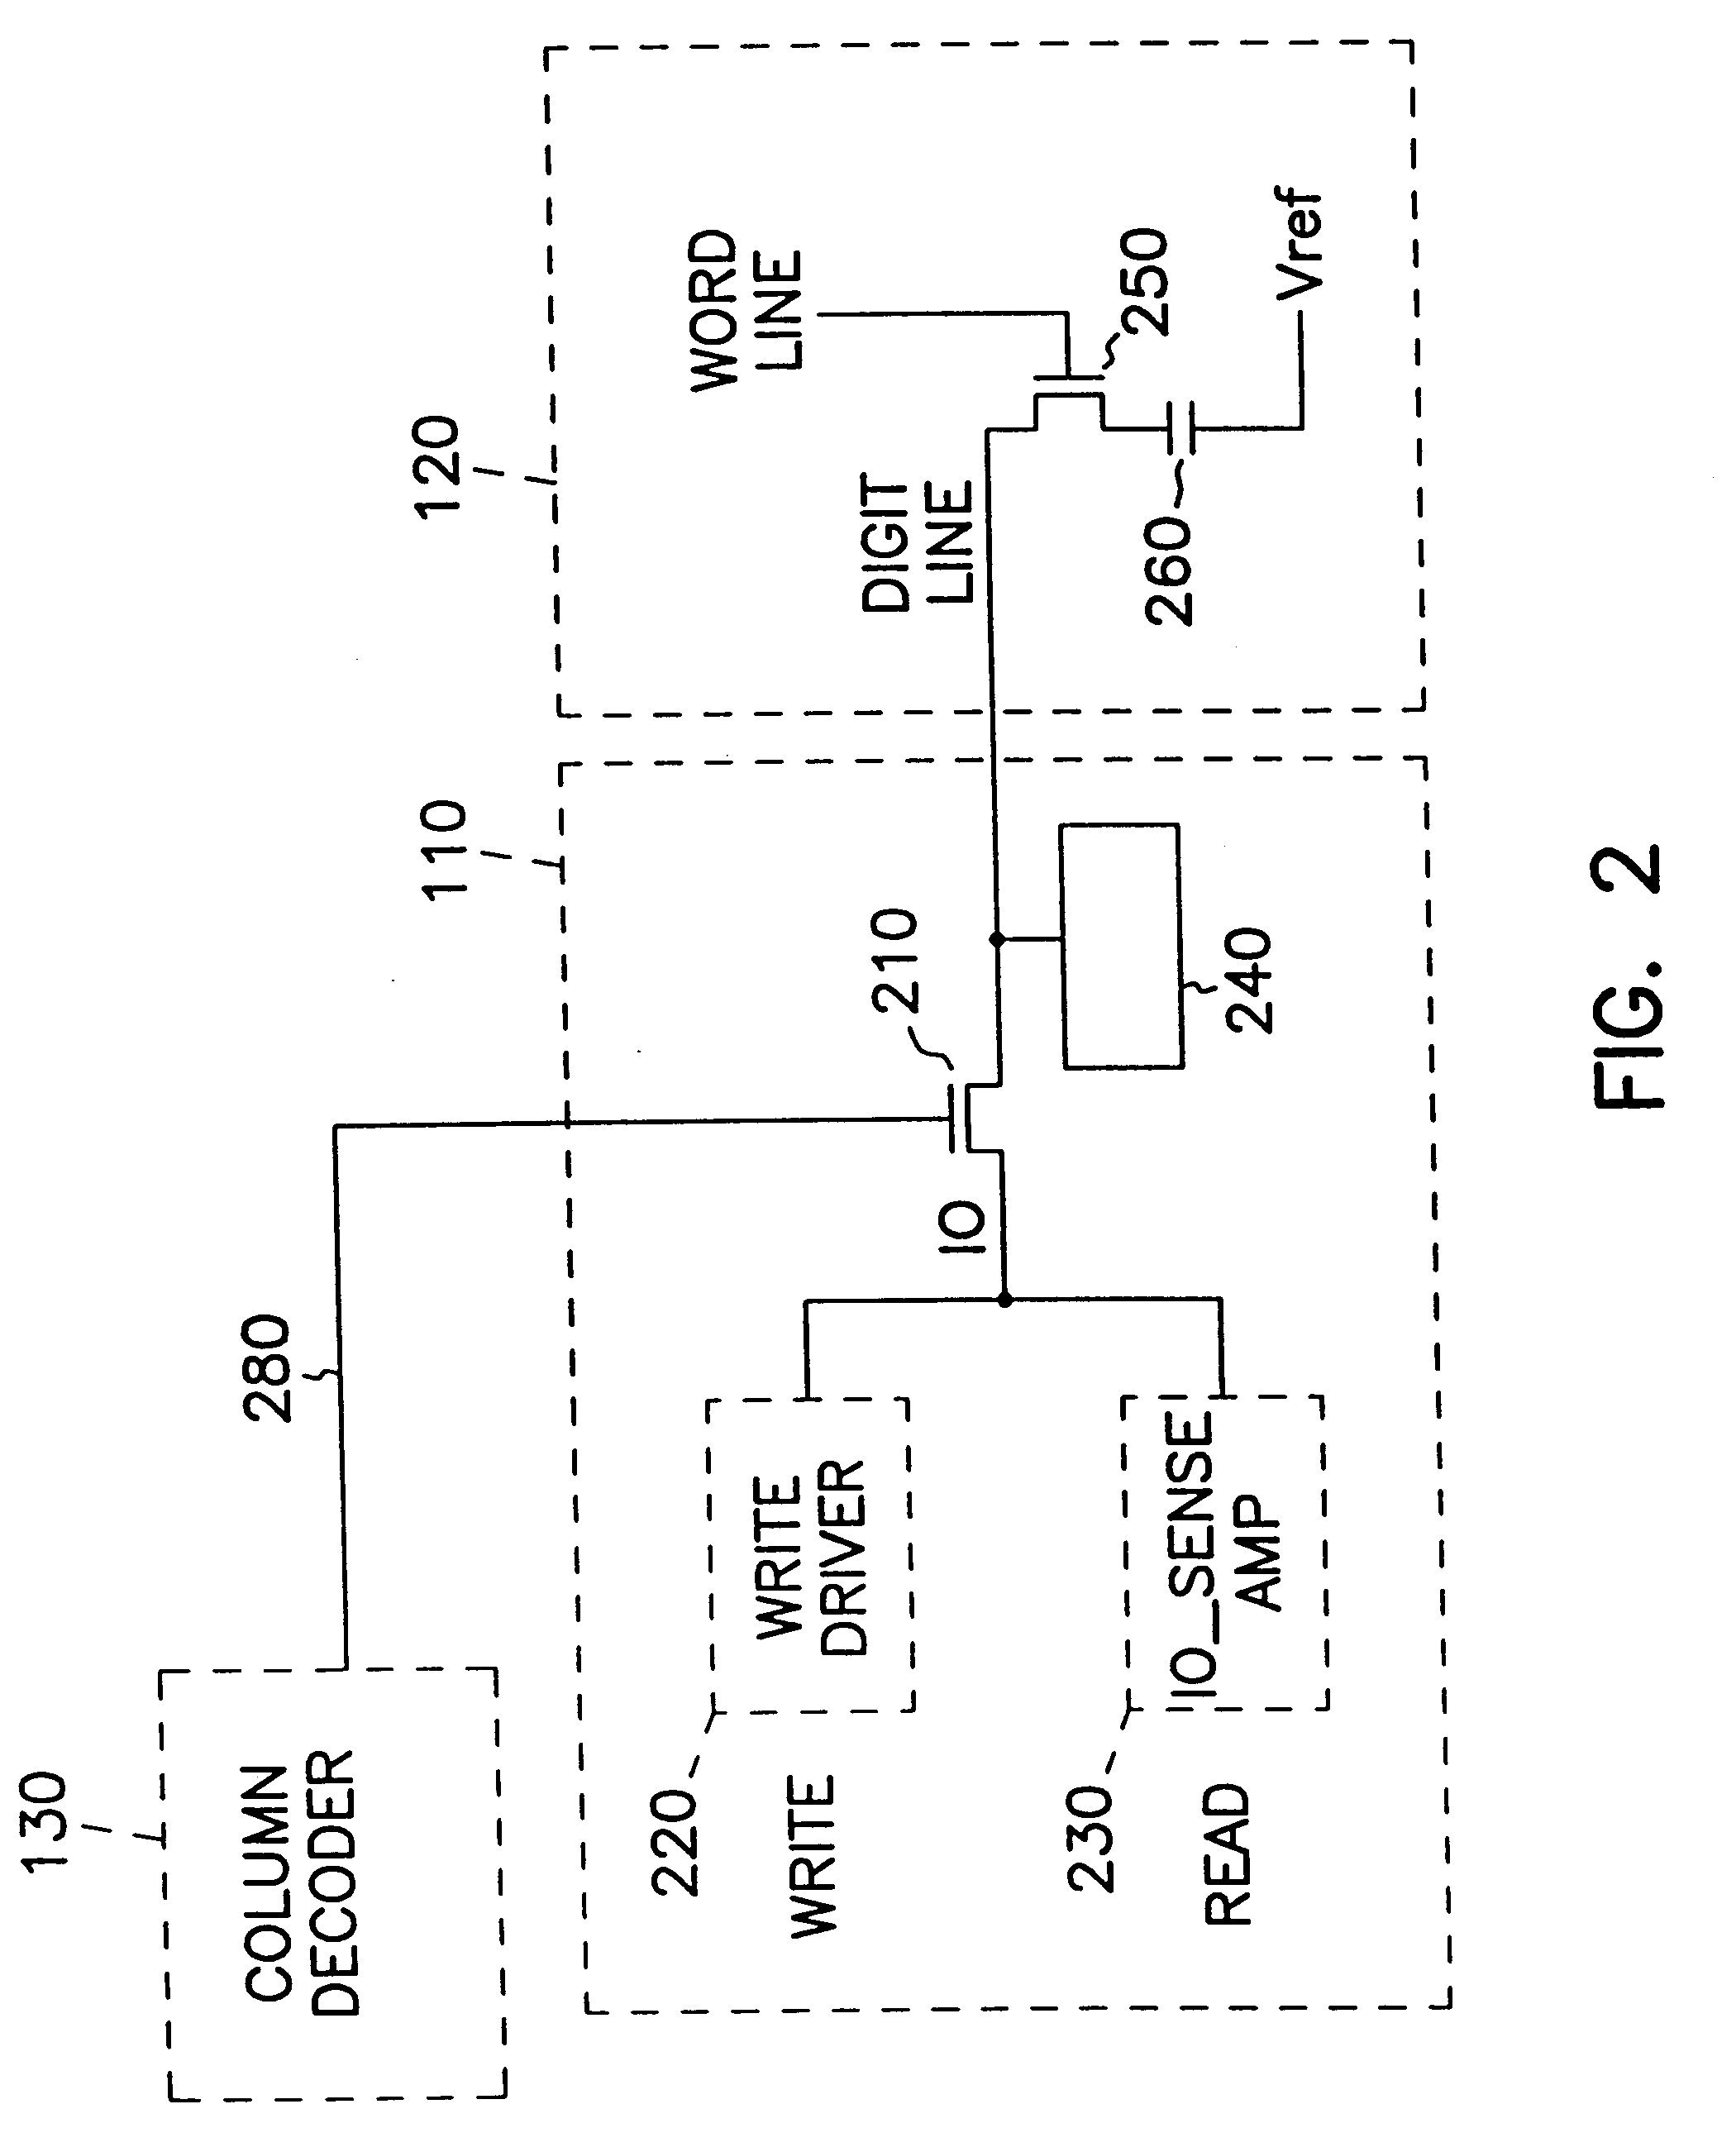 System for improved memory cell access